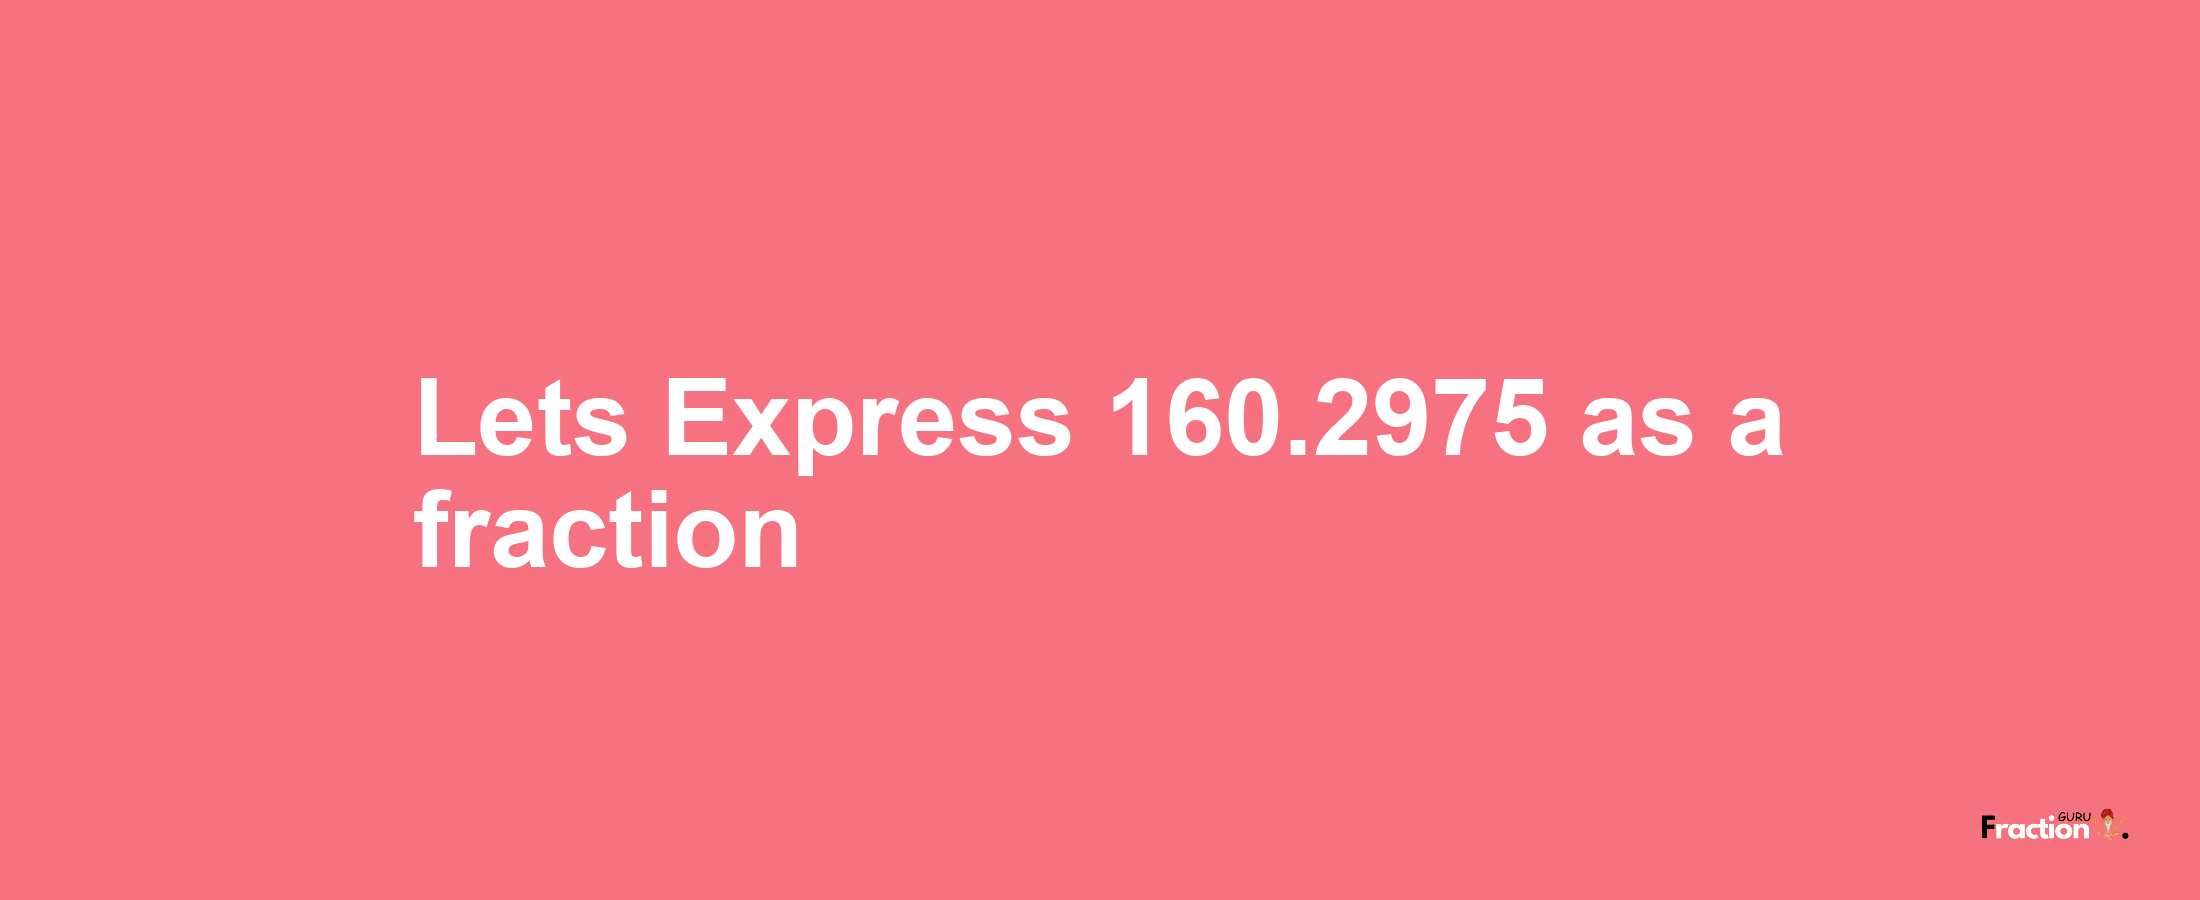 Lets Express 160.2975 as afraction